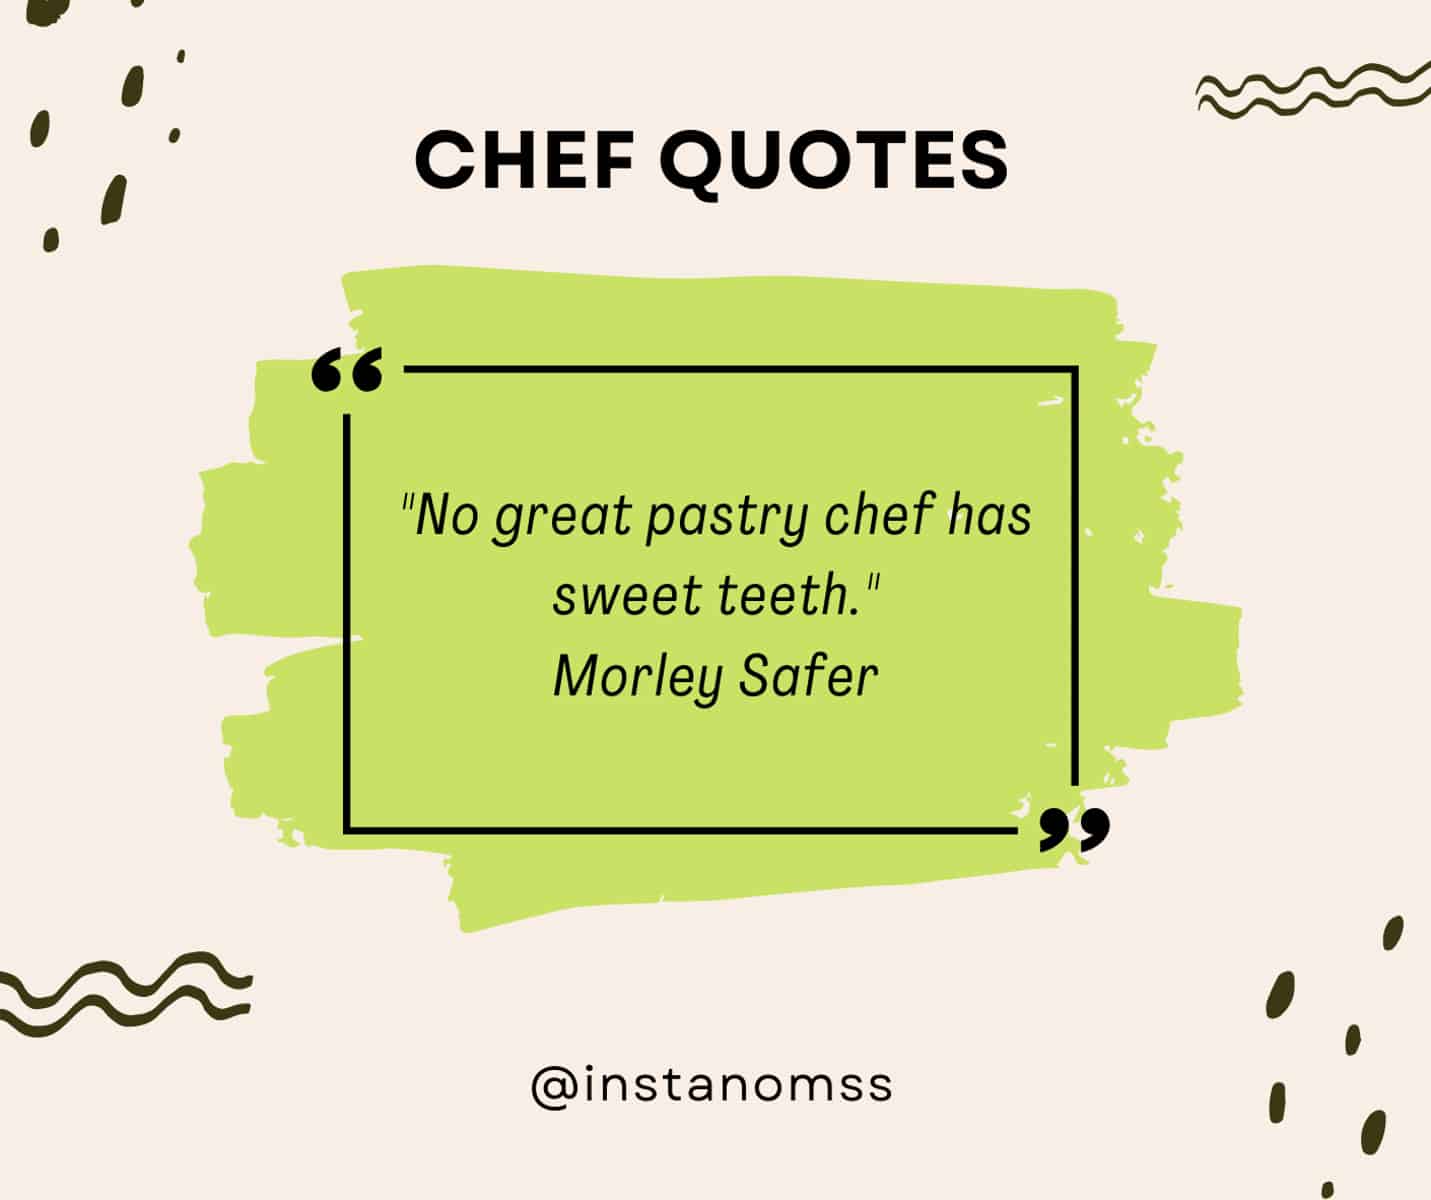 "No great pastry chef has sweet teeth." Morley Safer